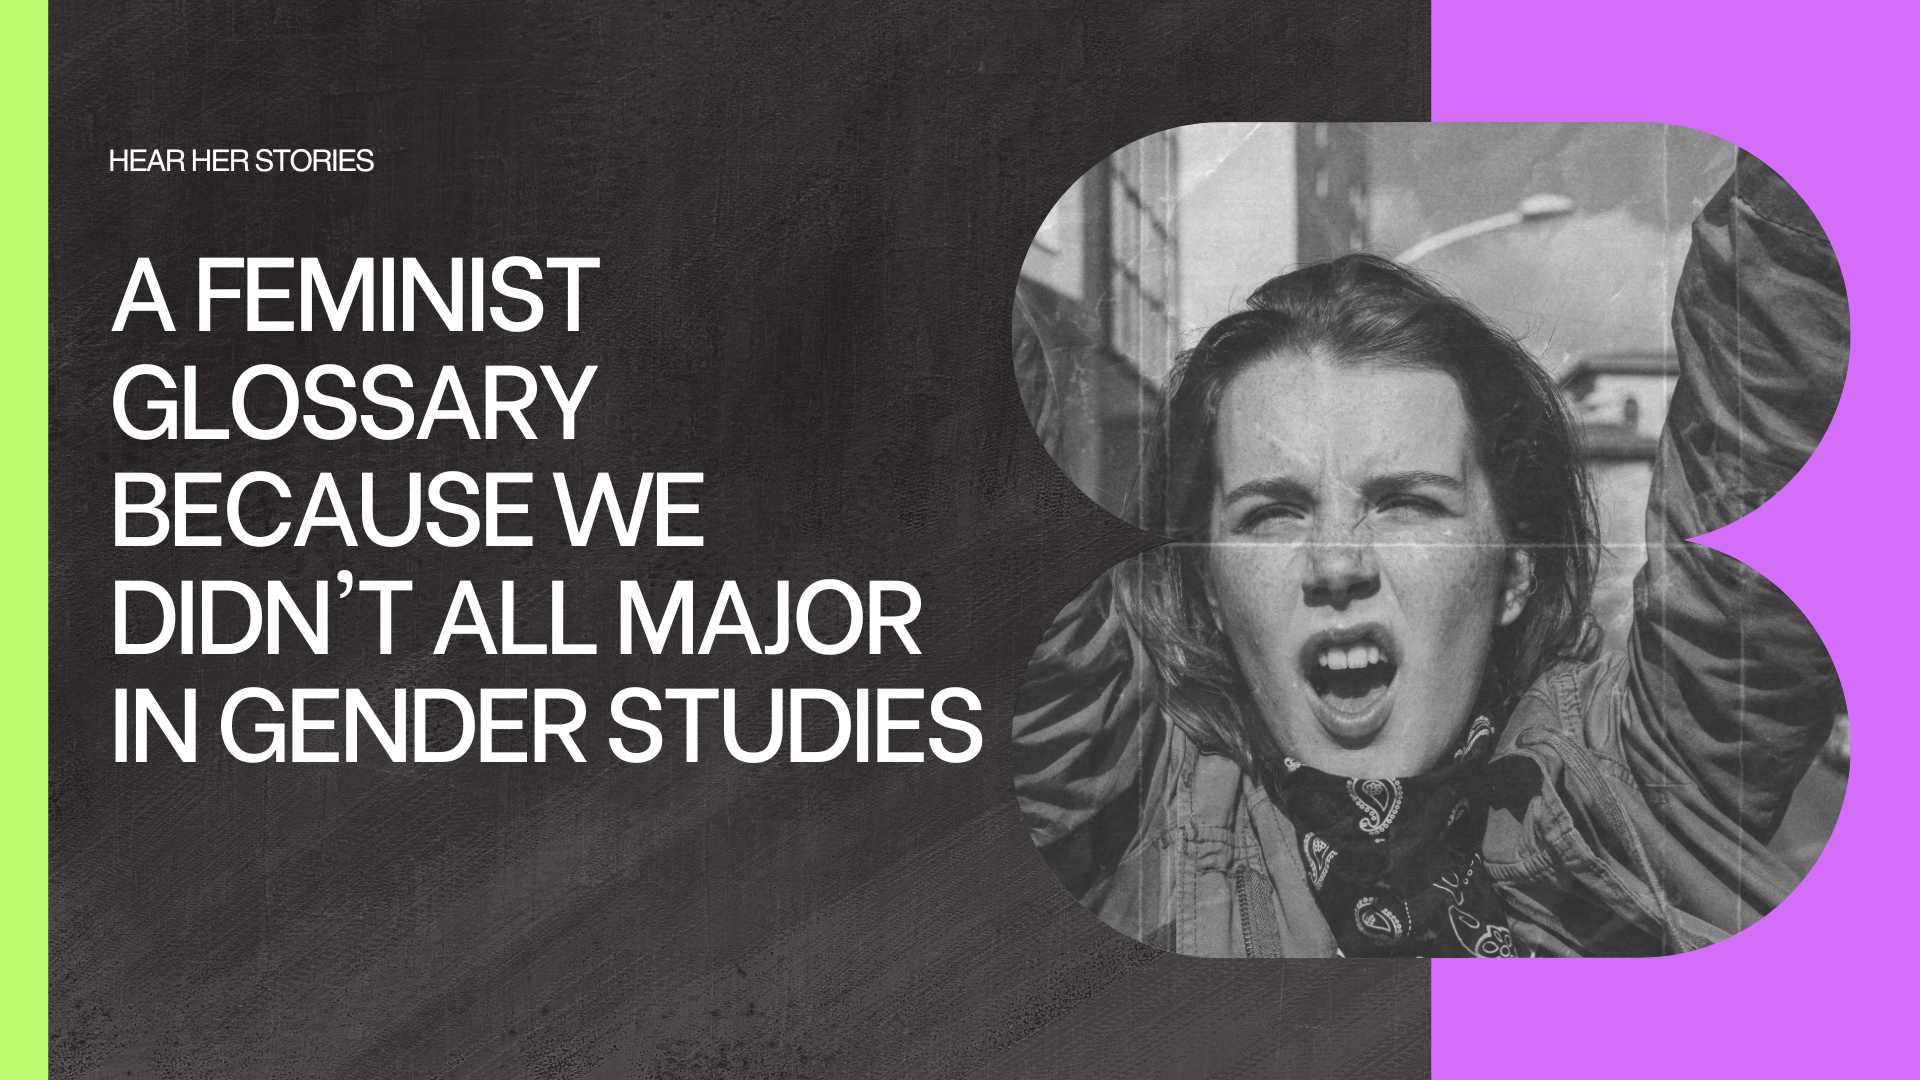 Featured image for “A feminist glossary because we didn’t all major in gender studies”